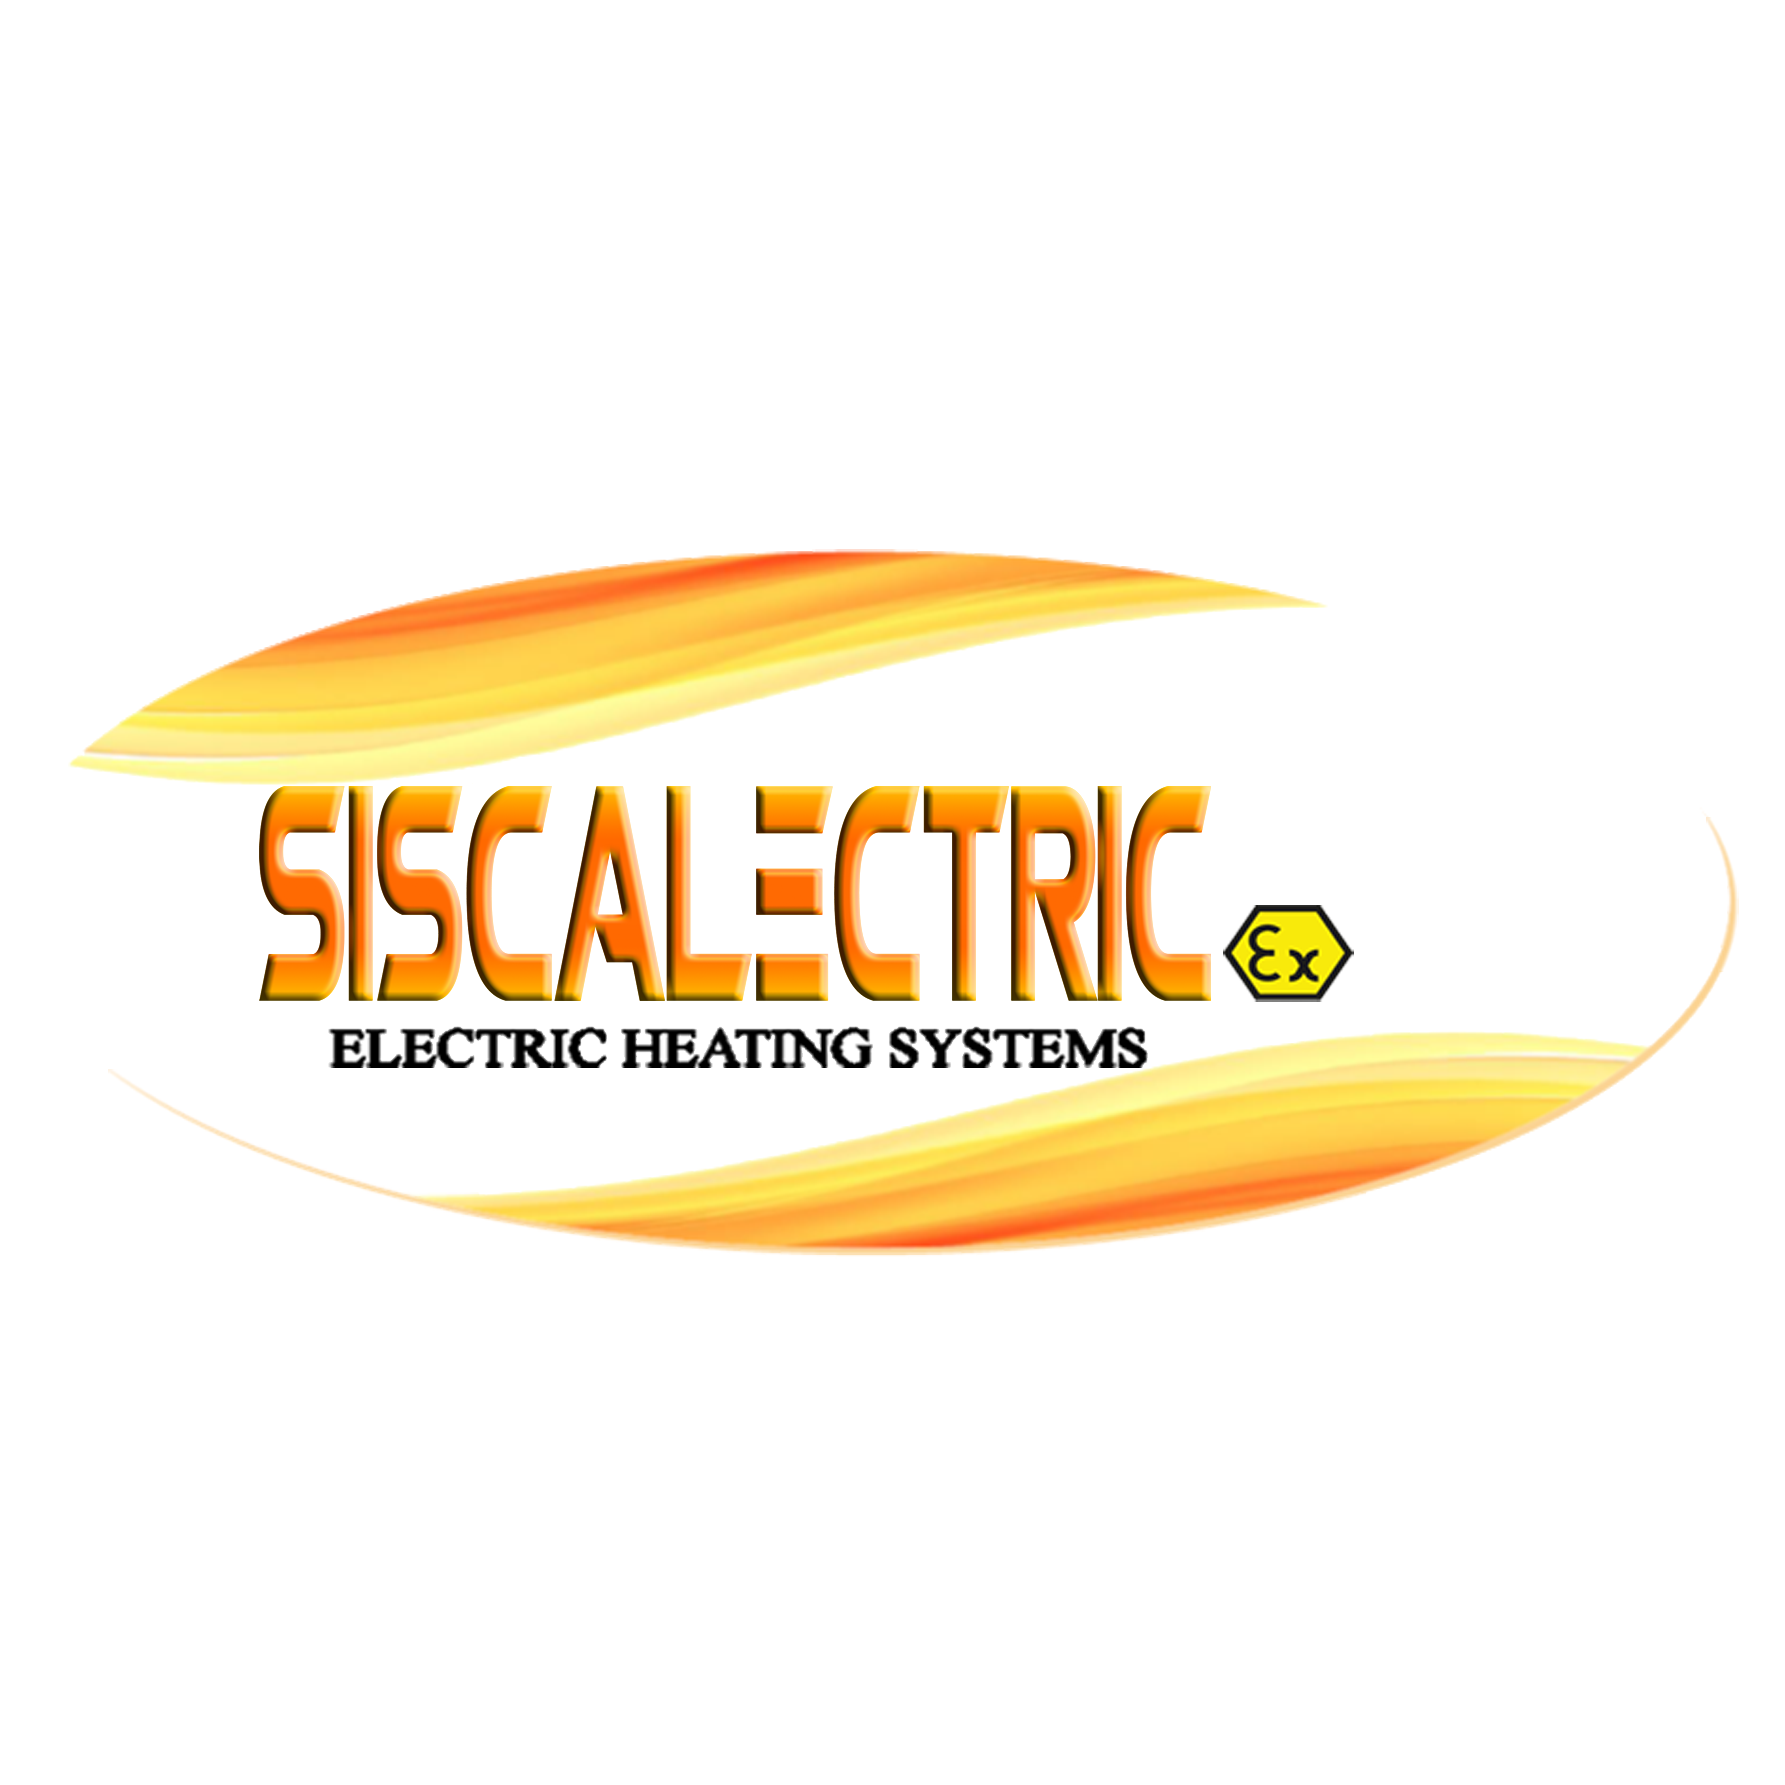 Siscalectric  Electric Heating Systems Logo